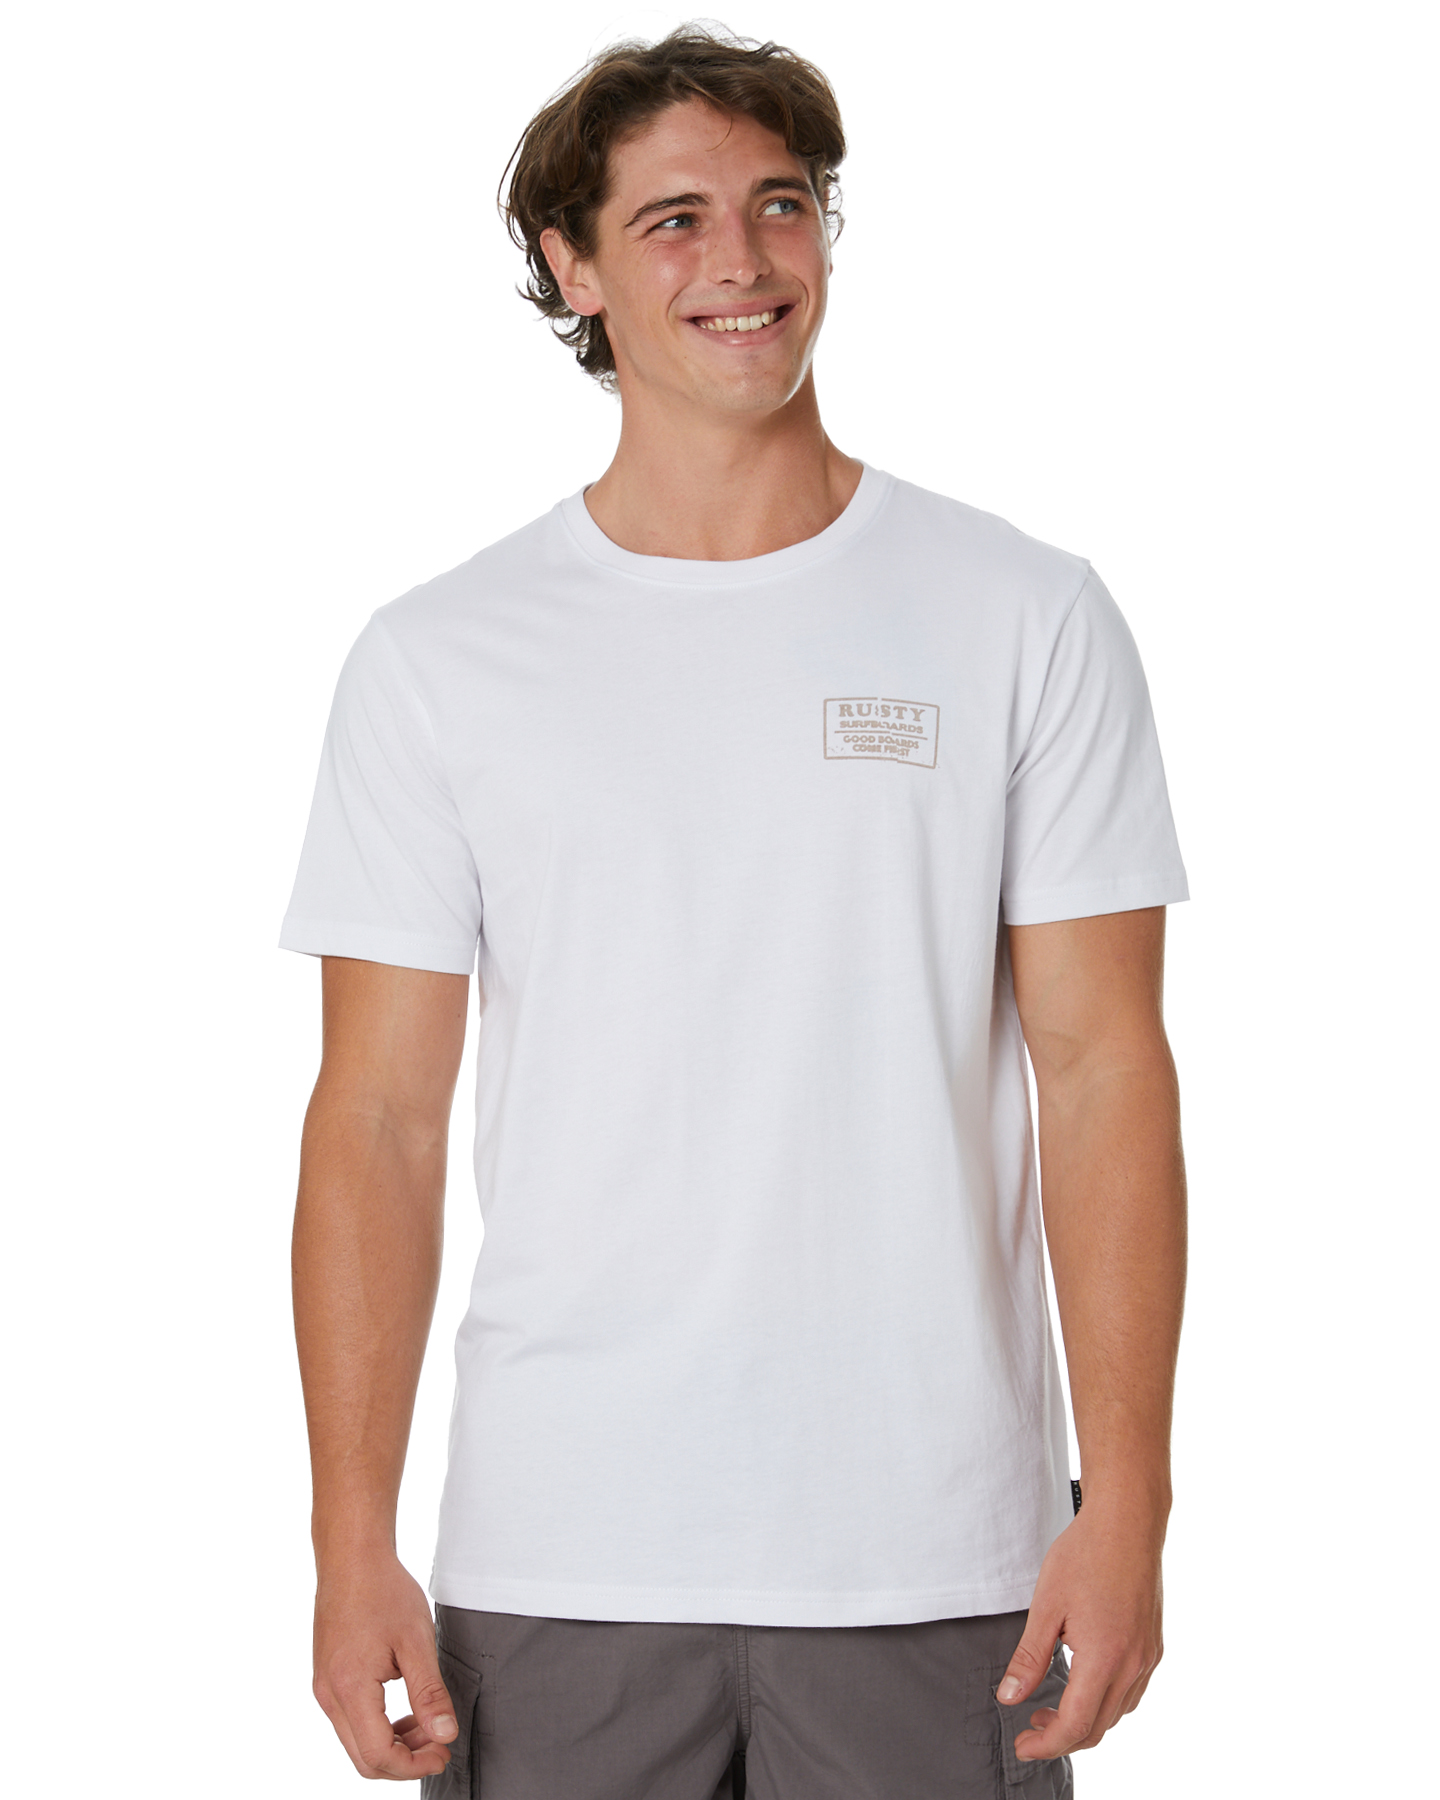 Rusty Stranded Mens Short Sleeve Tee - White | SurfStitch